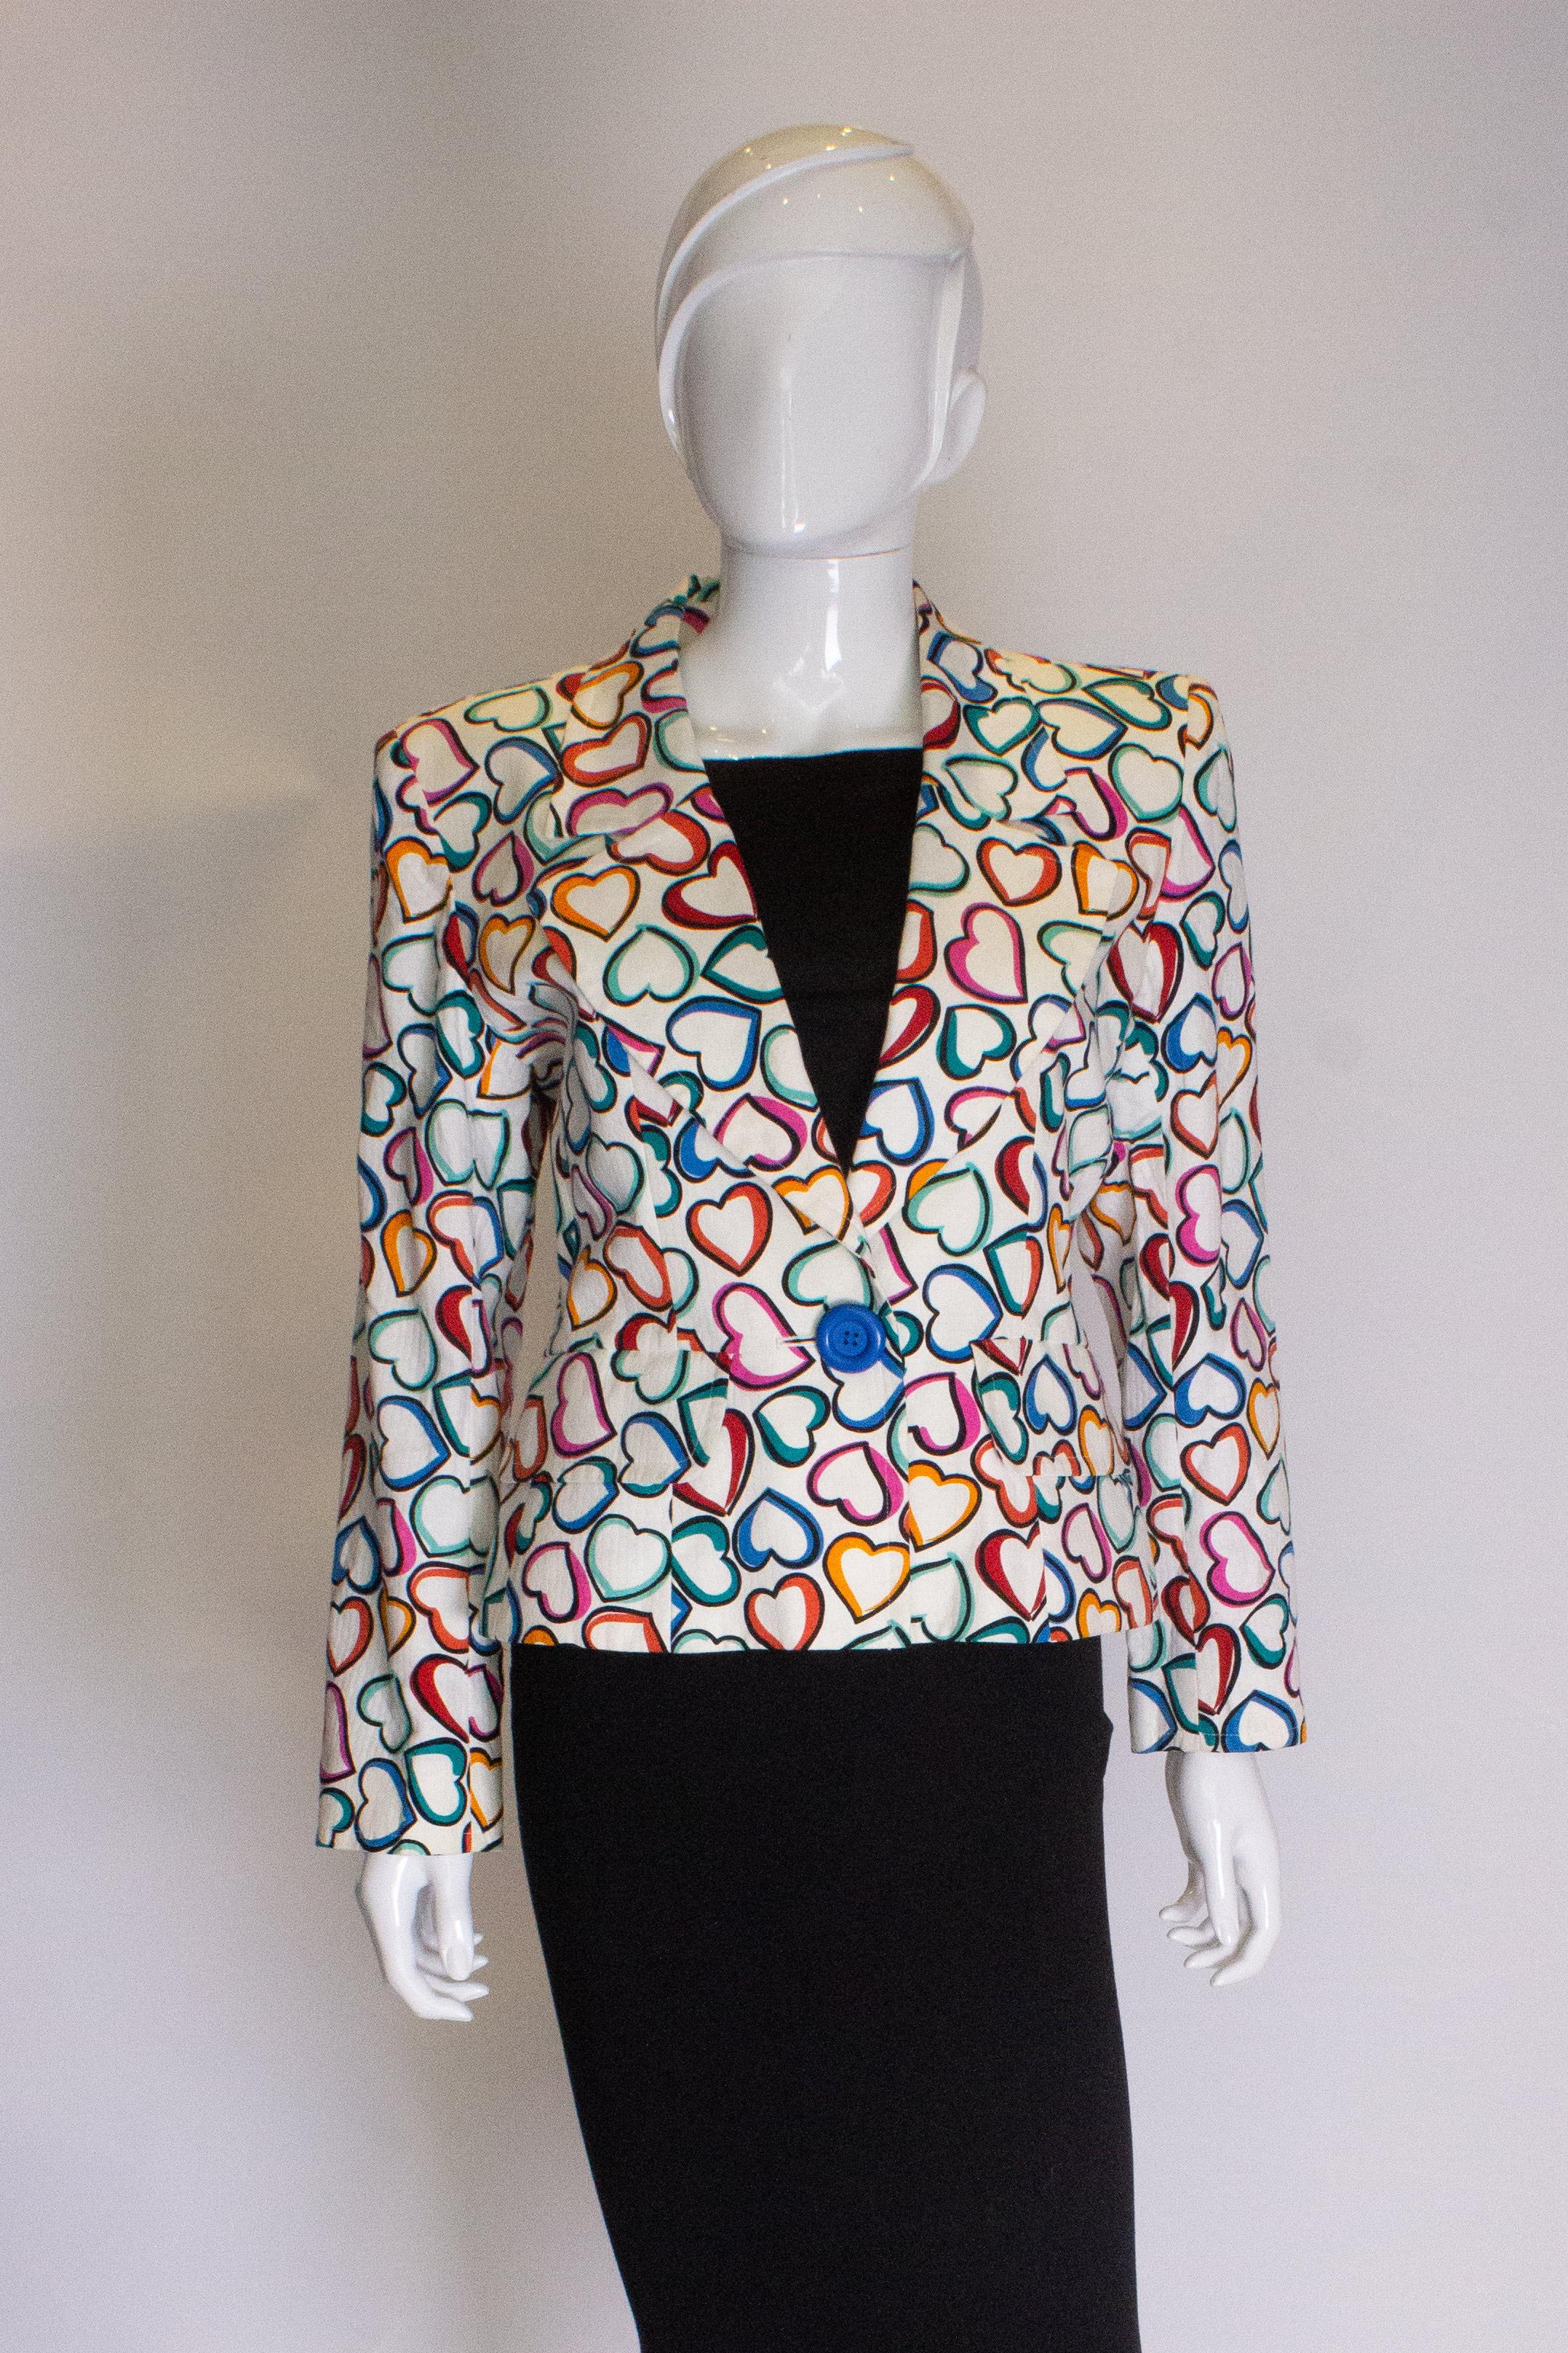 A fun jacket for Spring/Summer by Yves Saint Laurent. The cotton jacket has a multicoloour heart print with a one button opening and two front pockets. It has a button on each cuff and is fully lined.